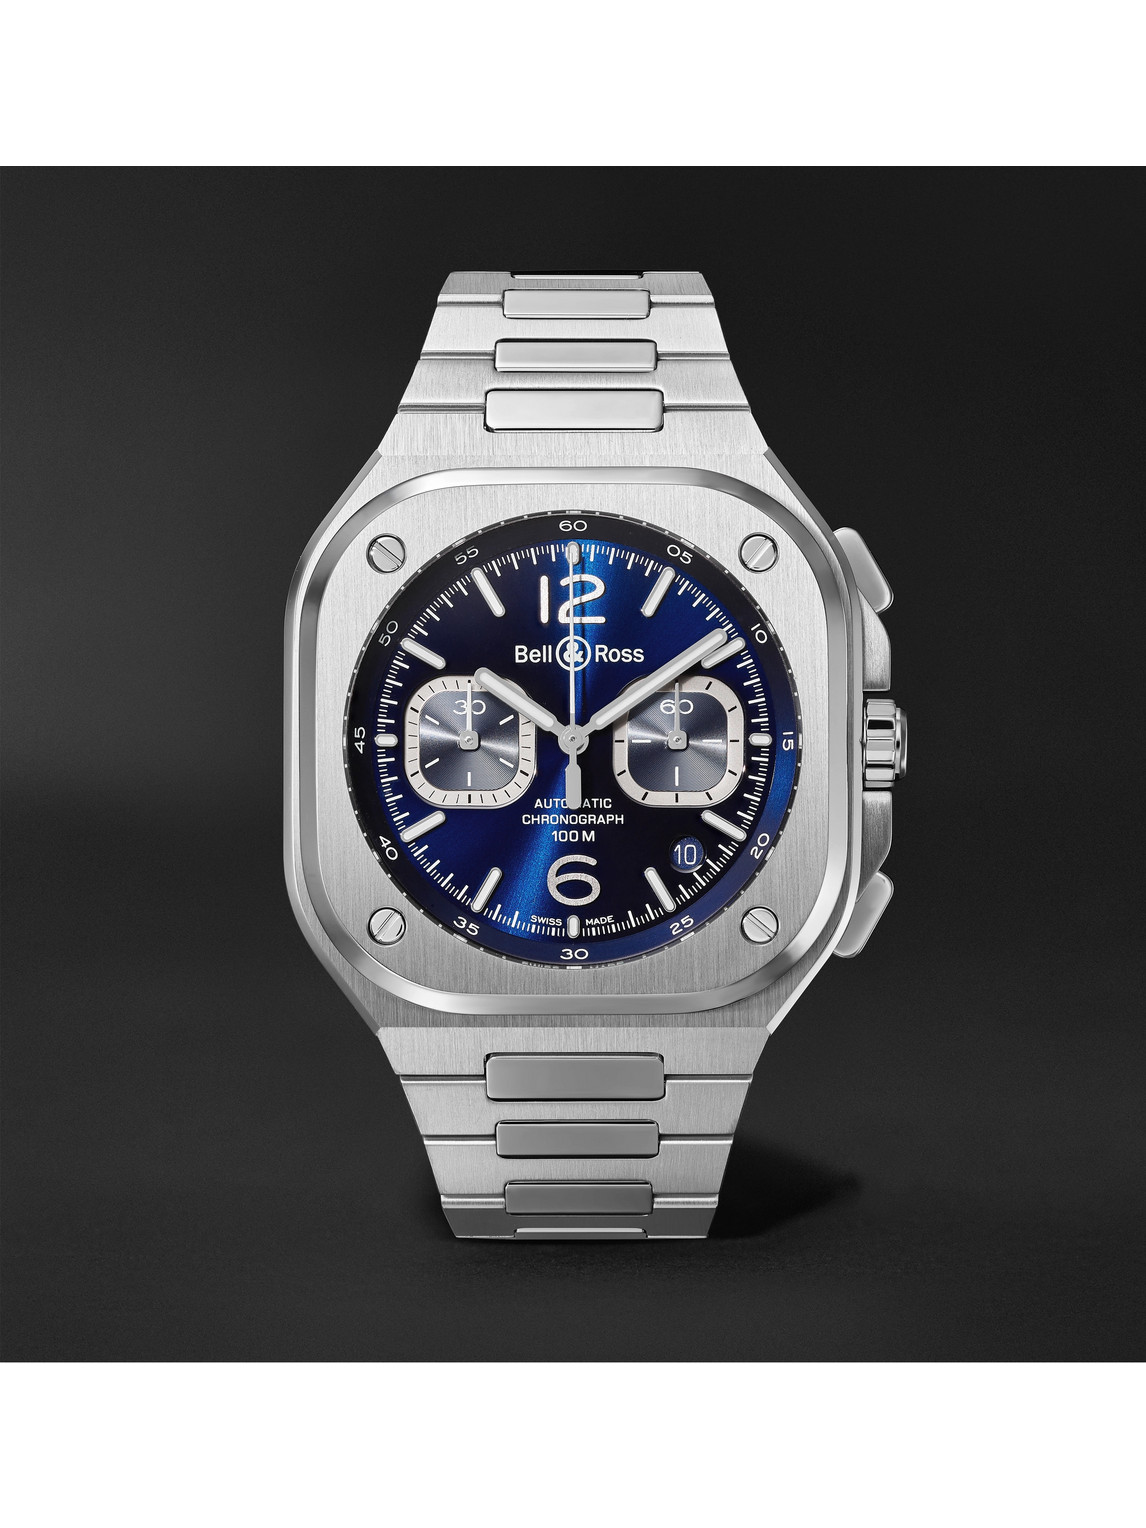 Bell & Ross Br 05 Automatic Chronograph 42mm Stainless Steel Watch, Ref. No. Br05c-bu-st/sst In Blue